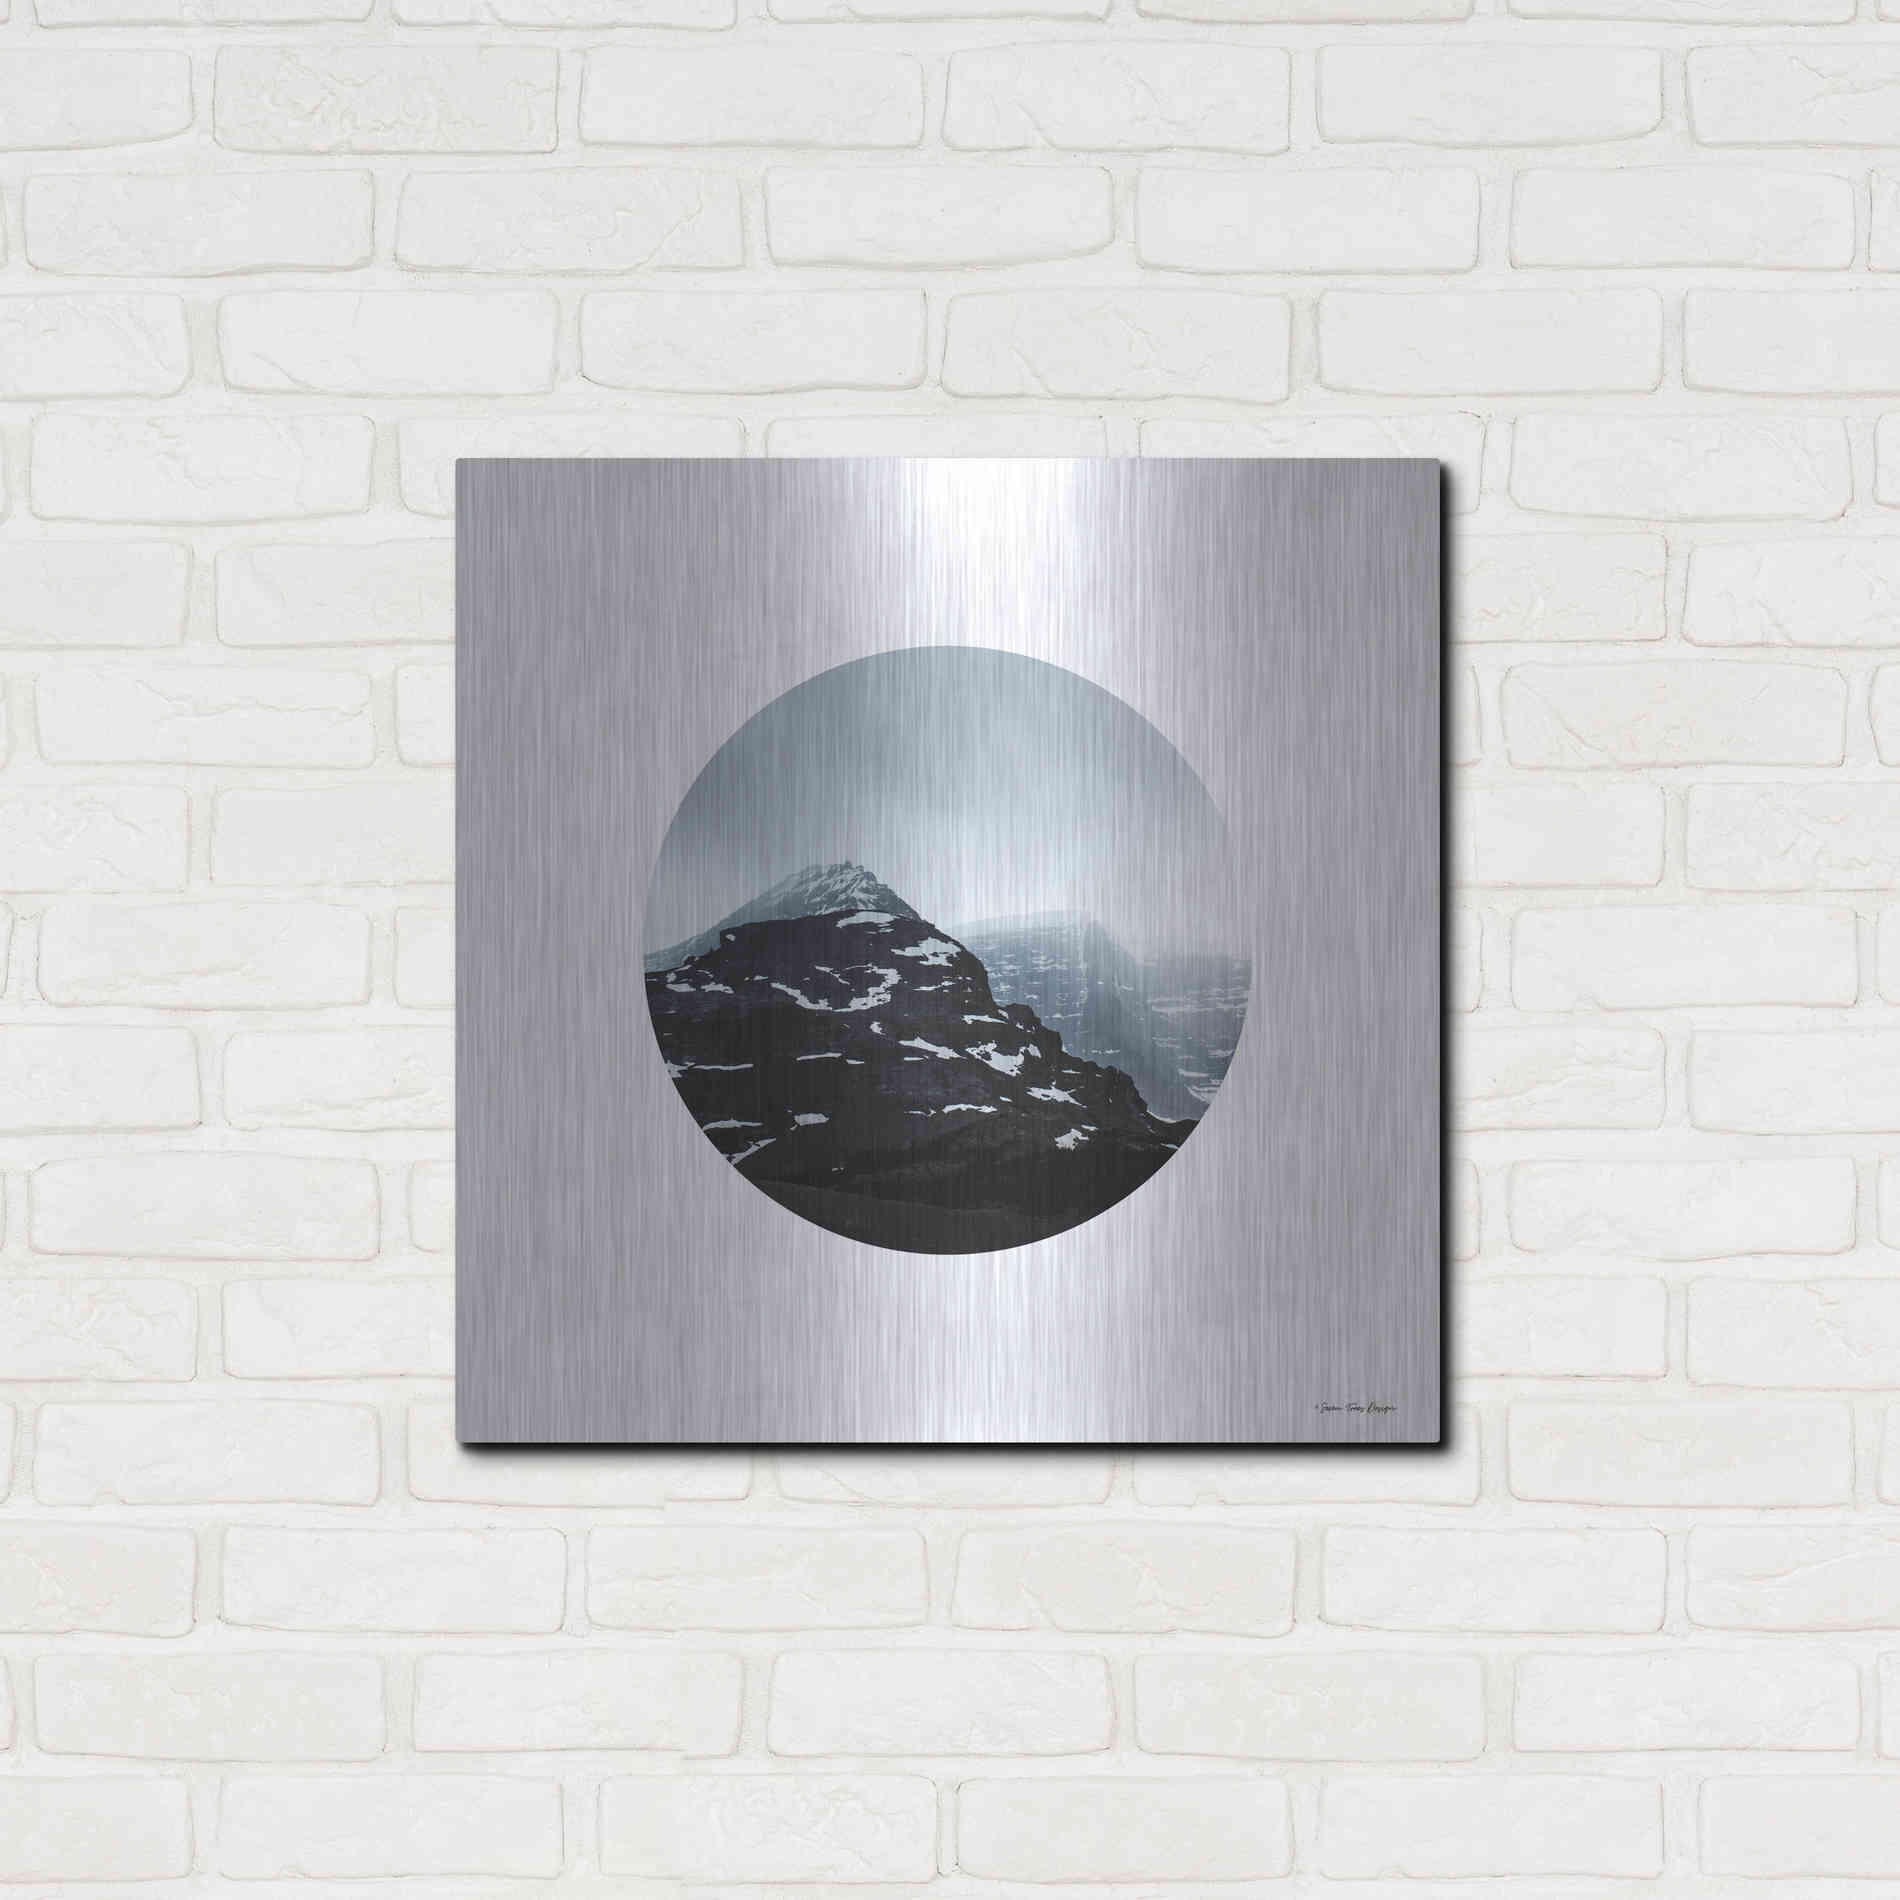 Luxe Metal Art 'Snow Mountains' by Seven Trees Design, Metal Wall Art,24x24